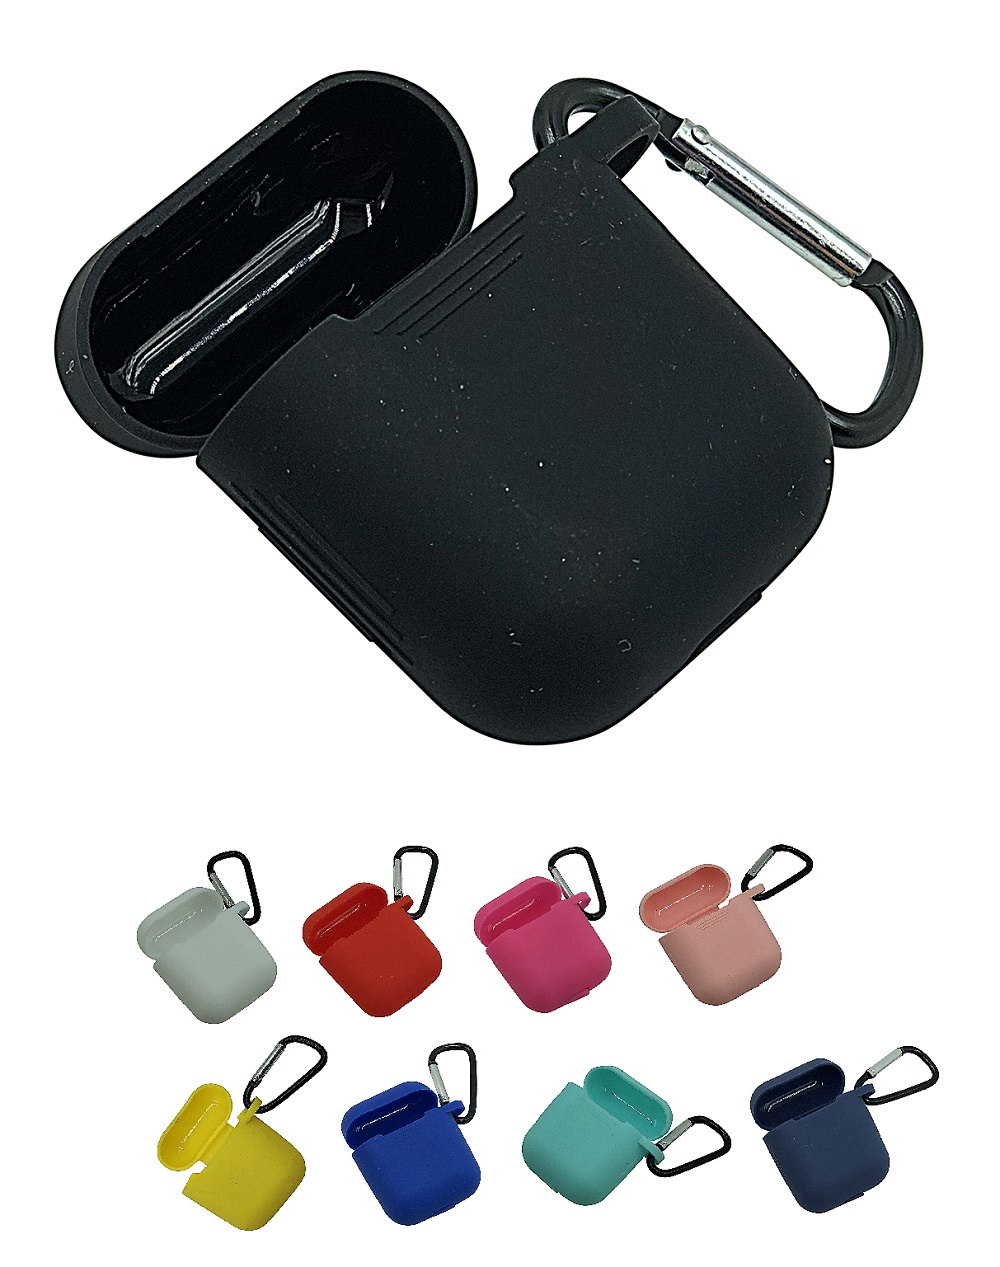 Apple AirPods Silikone-Cover